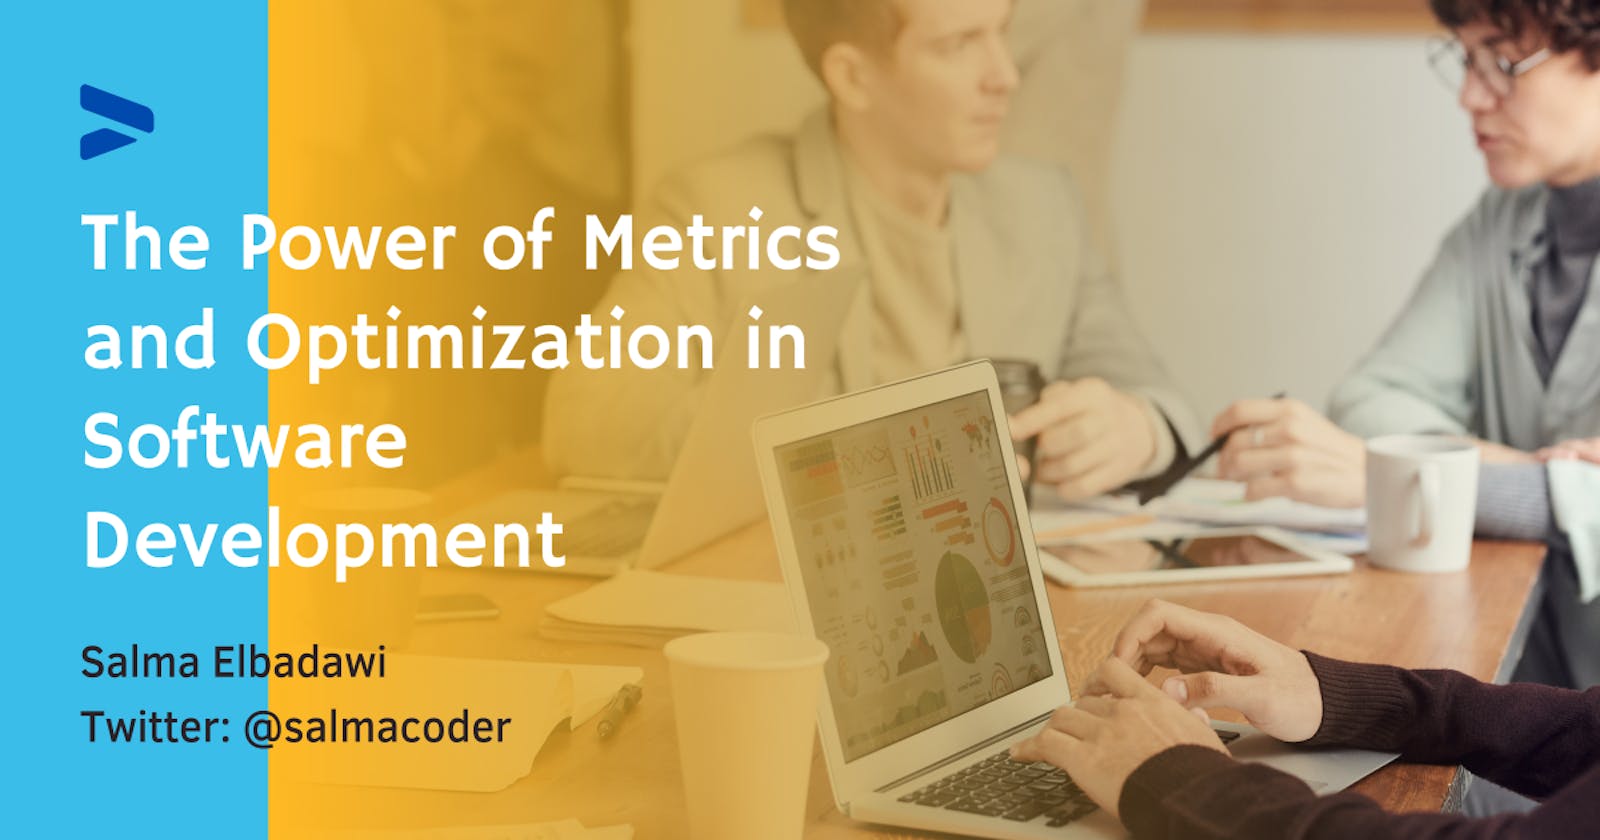 The Power of Metrics and Optimization in Software Development